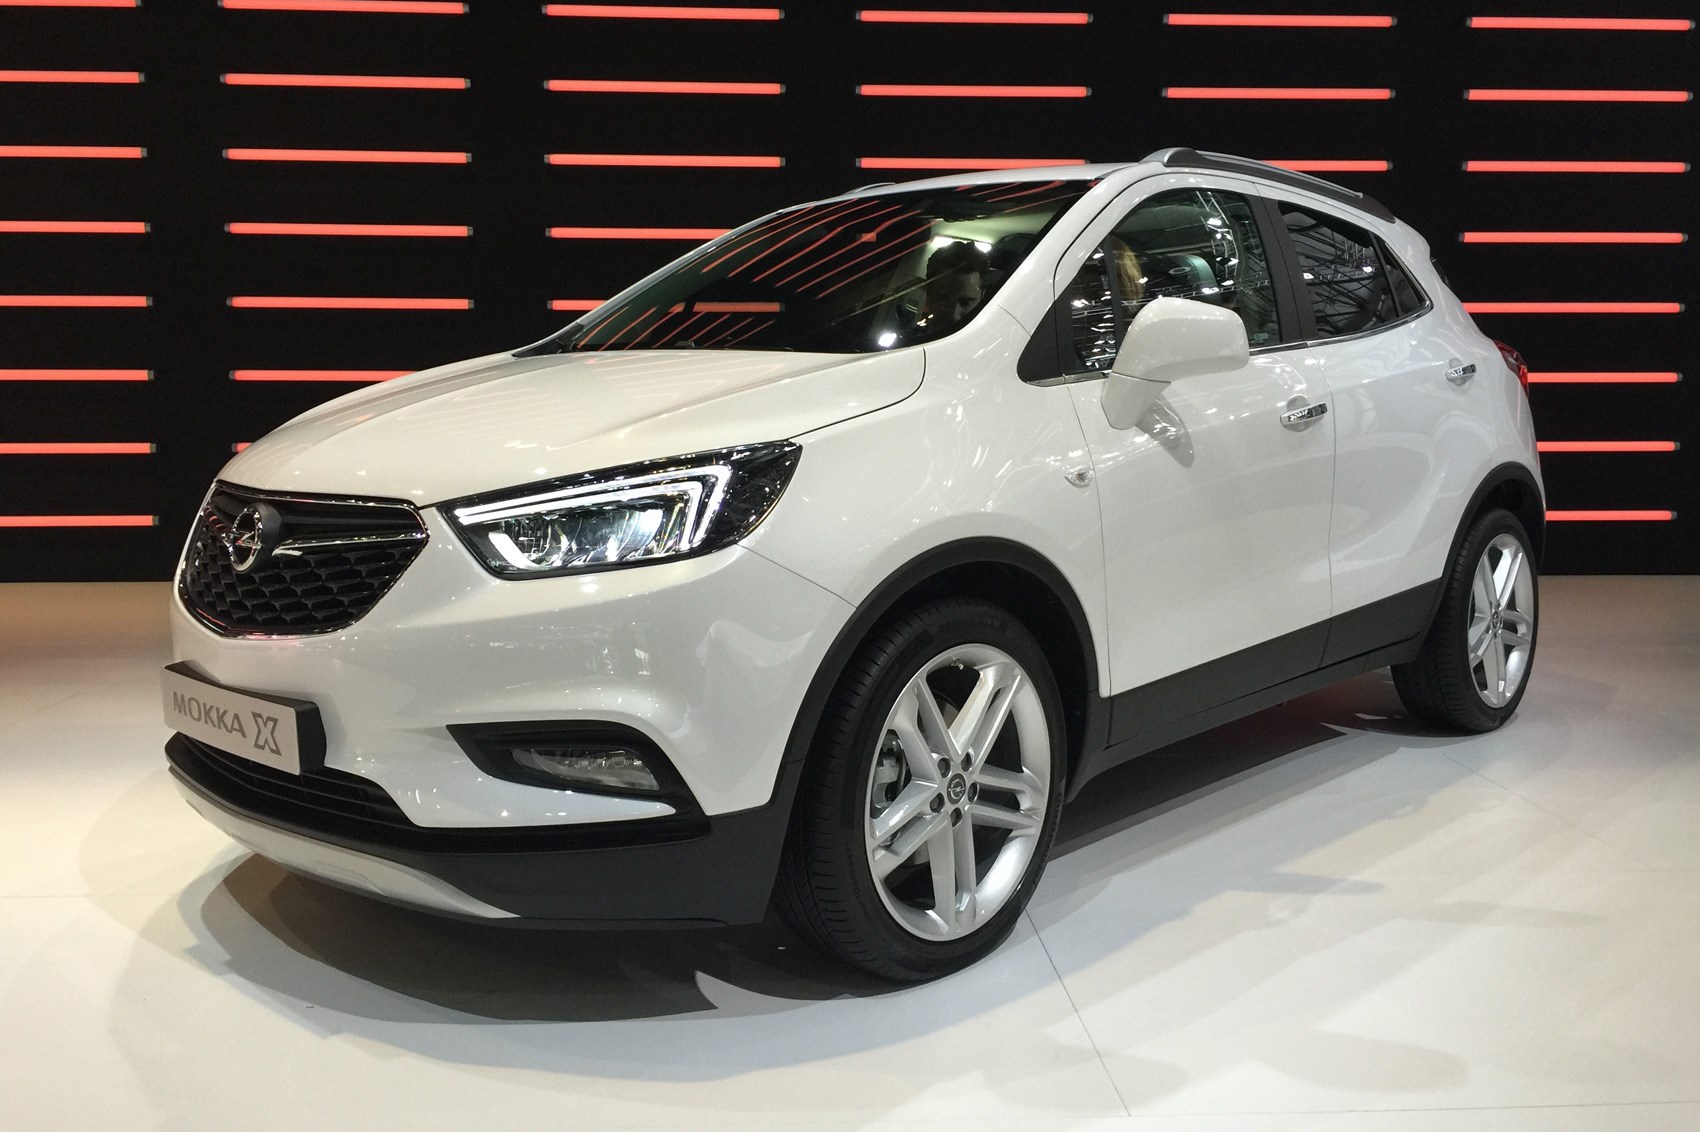 Vauxhall Mokka X revealed: a facelift and a name change for 2016